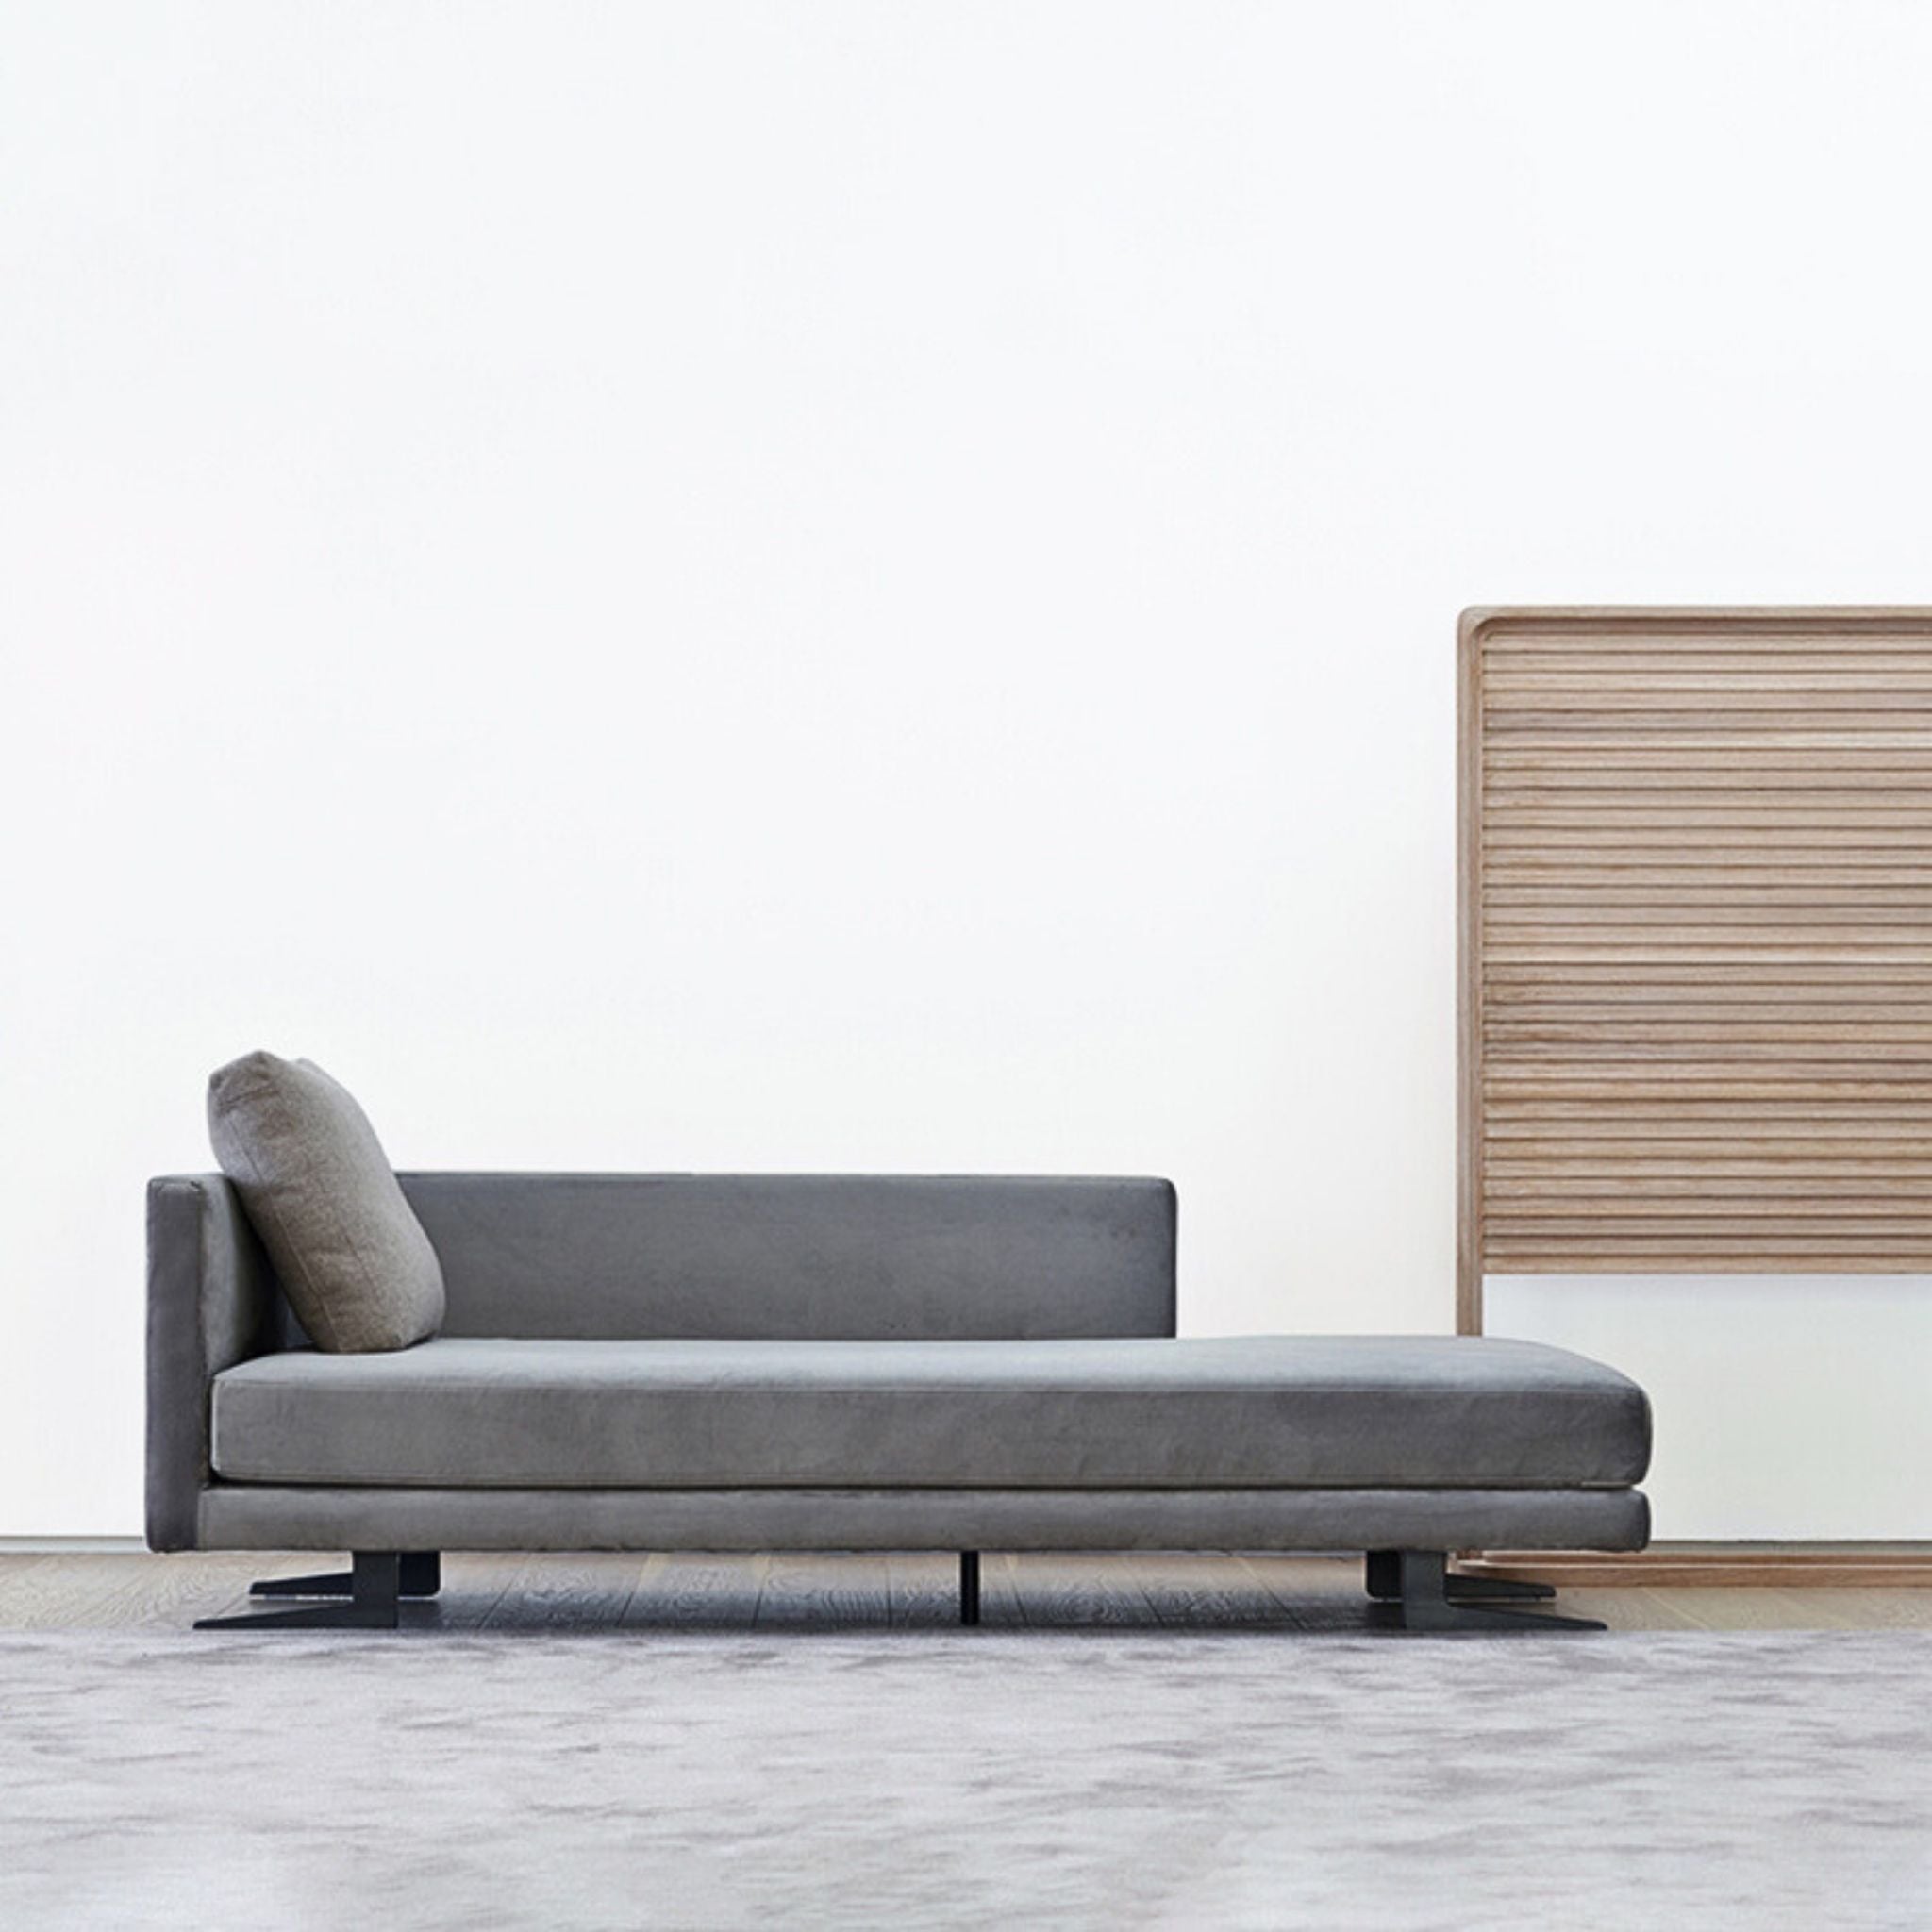 Bologna Minimalist Chaise Lounge - The Feelter